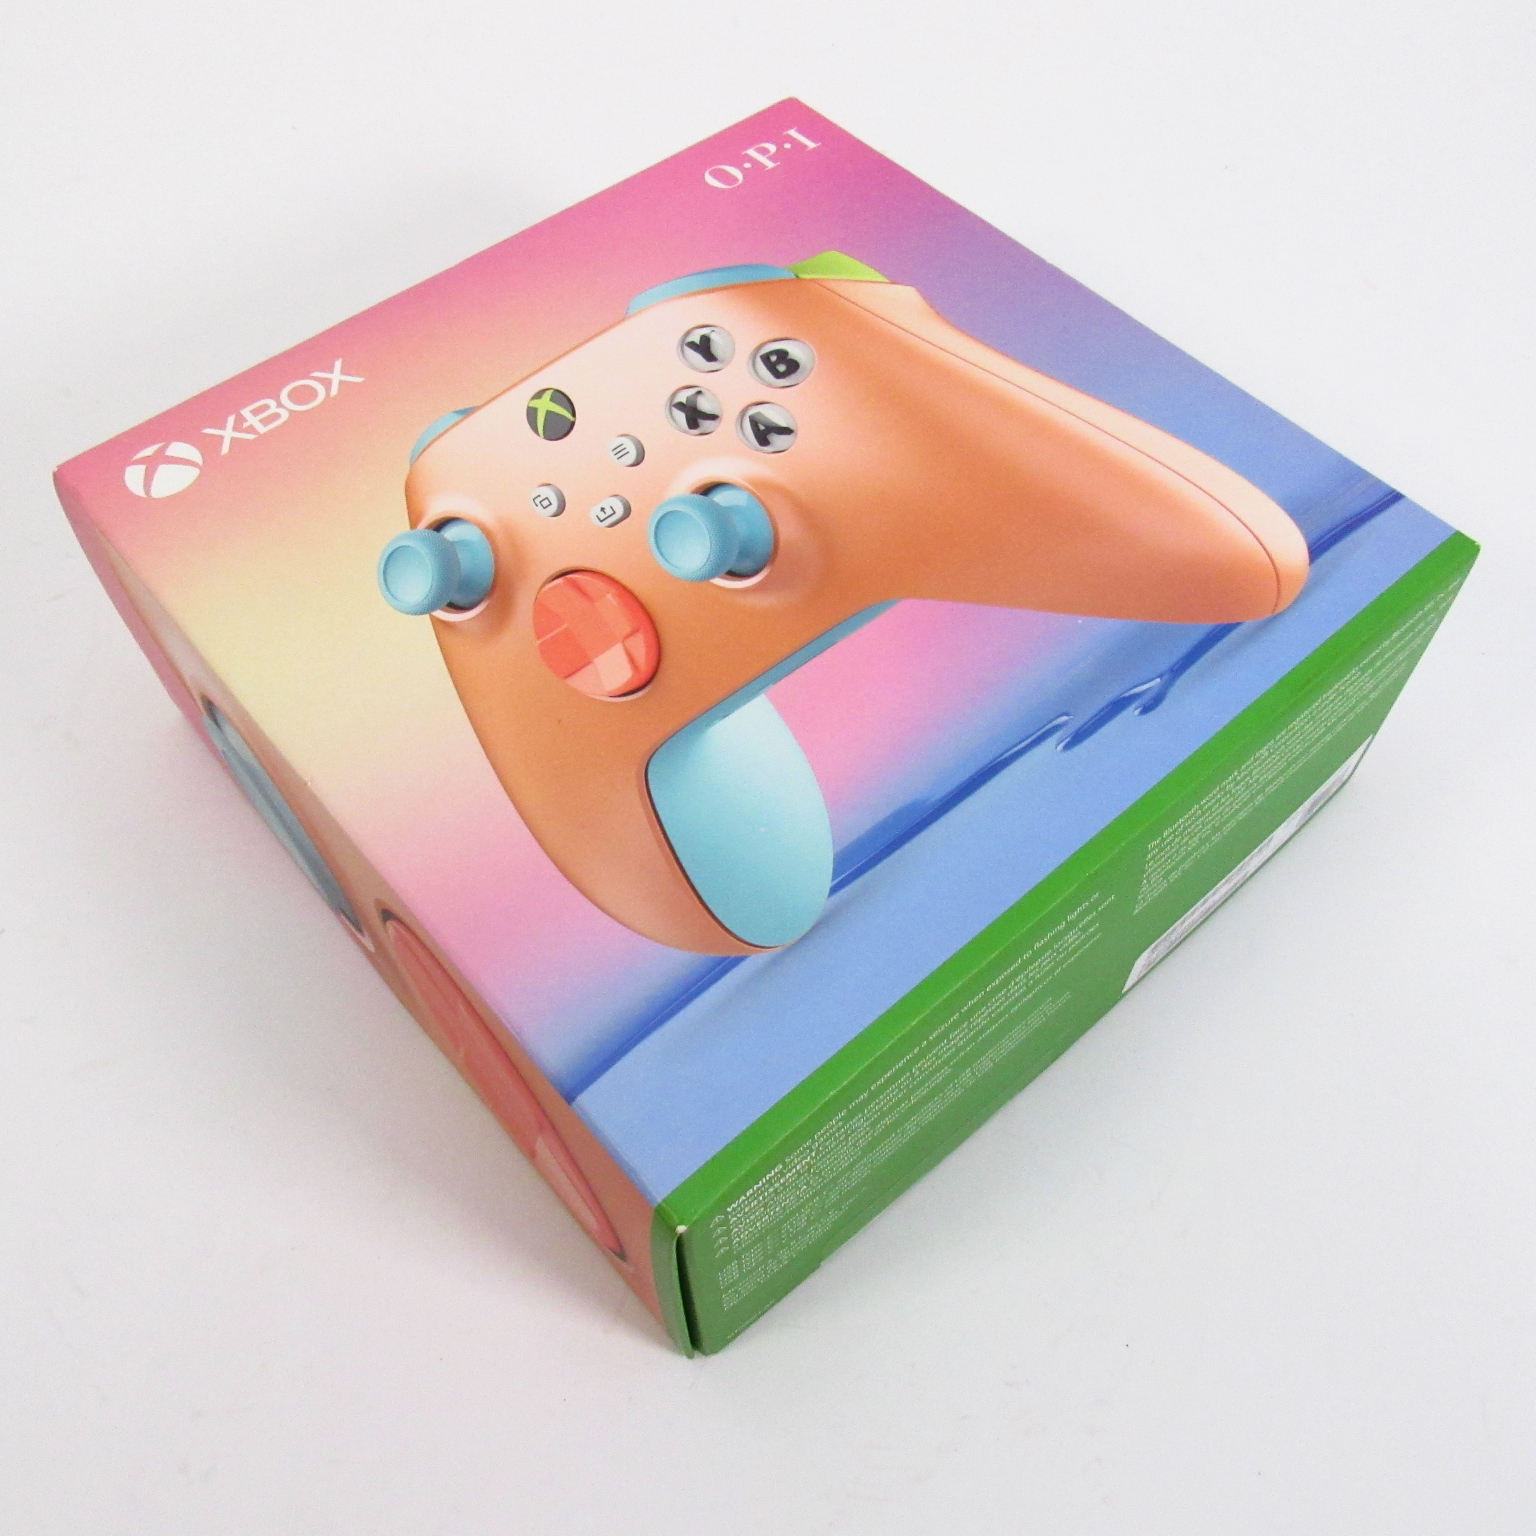 Microsoft Xbox Edition Special Wireless Sunkissed Vibes 1914 - Controller O.P.I.